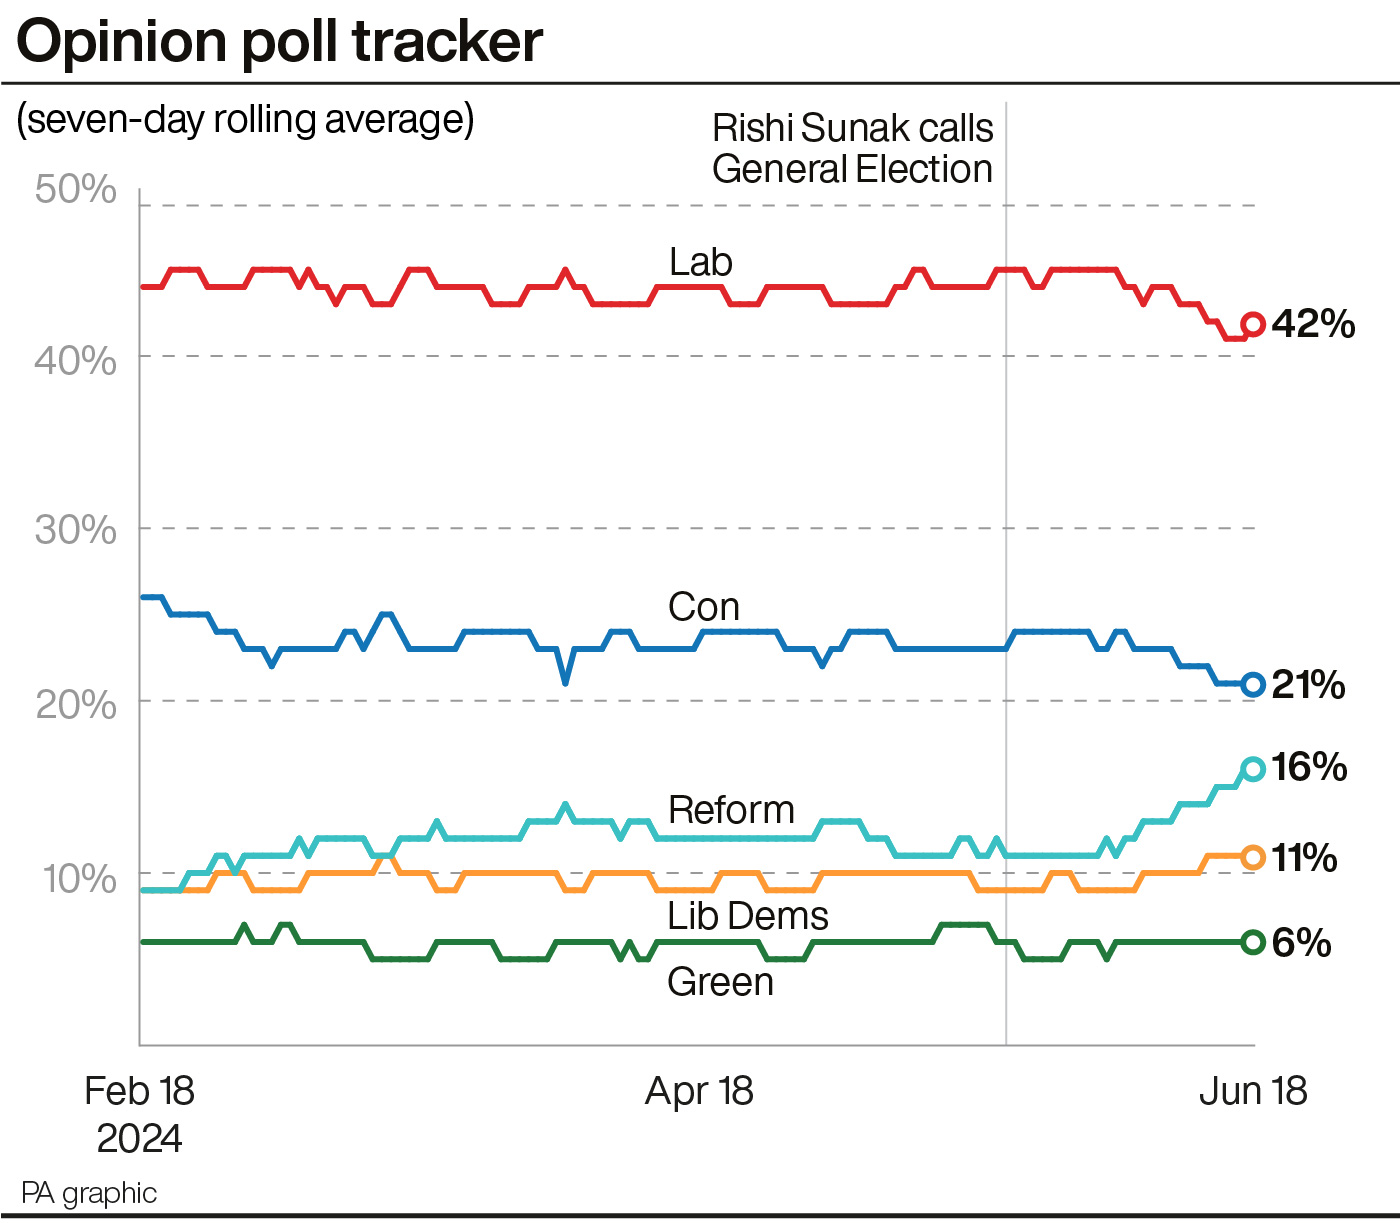 A line graph showing the latest opinion poll averages for the main political parties, with Labour on 42%, 21 points ahead of the Conservatives on 21%, followed by Reform on 16%, the Lib Dems on 11% and the Greens on 6%